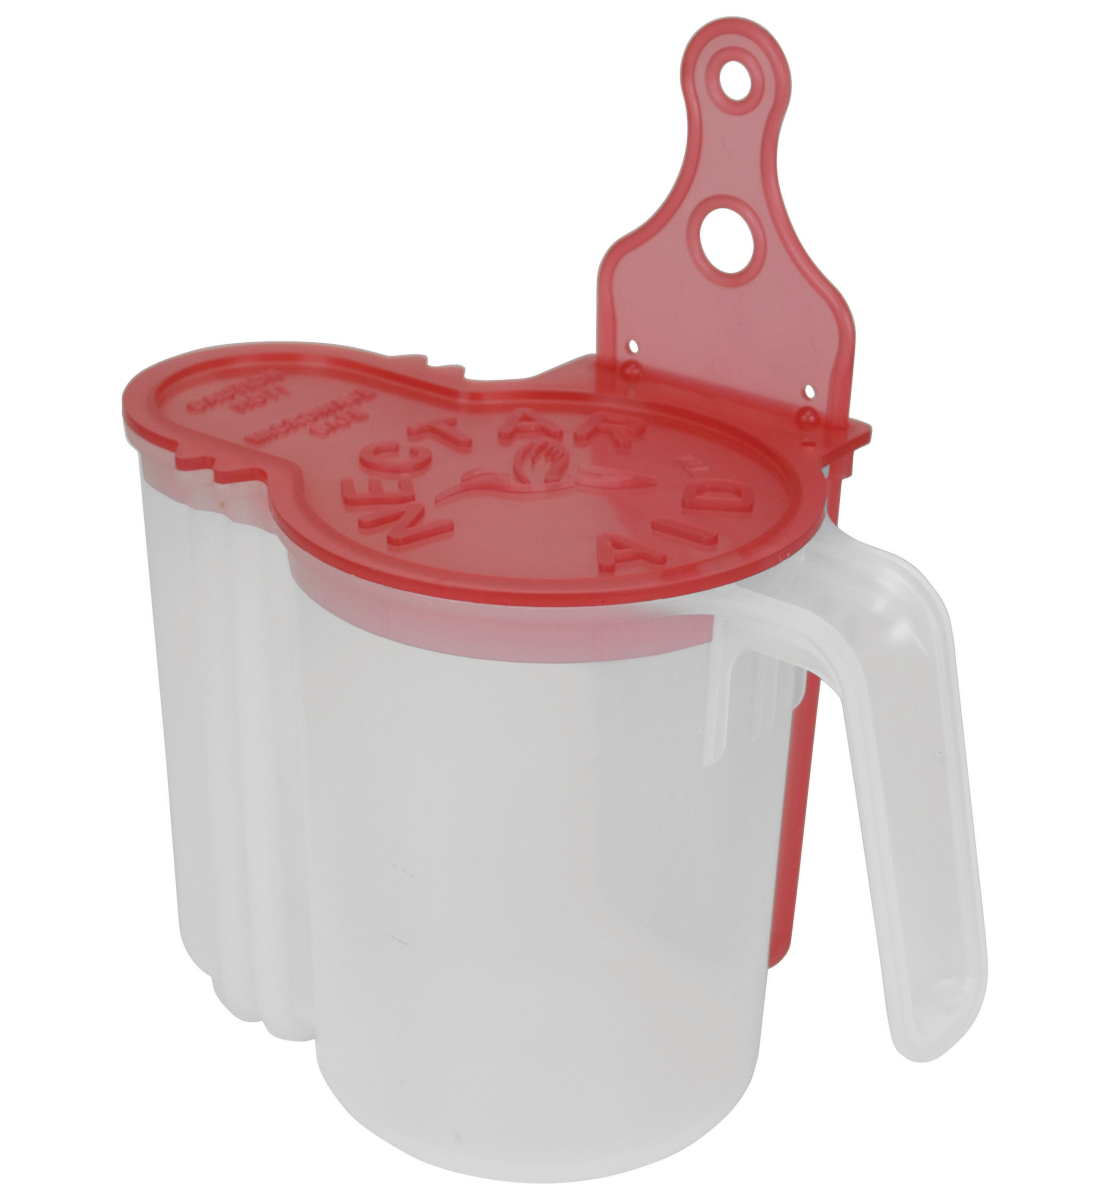 Nectar-Aid Self Measuring Mixing & Storage Pitcher